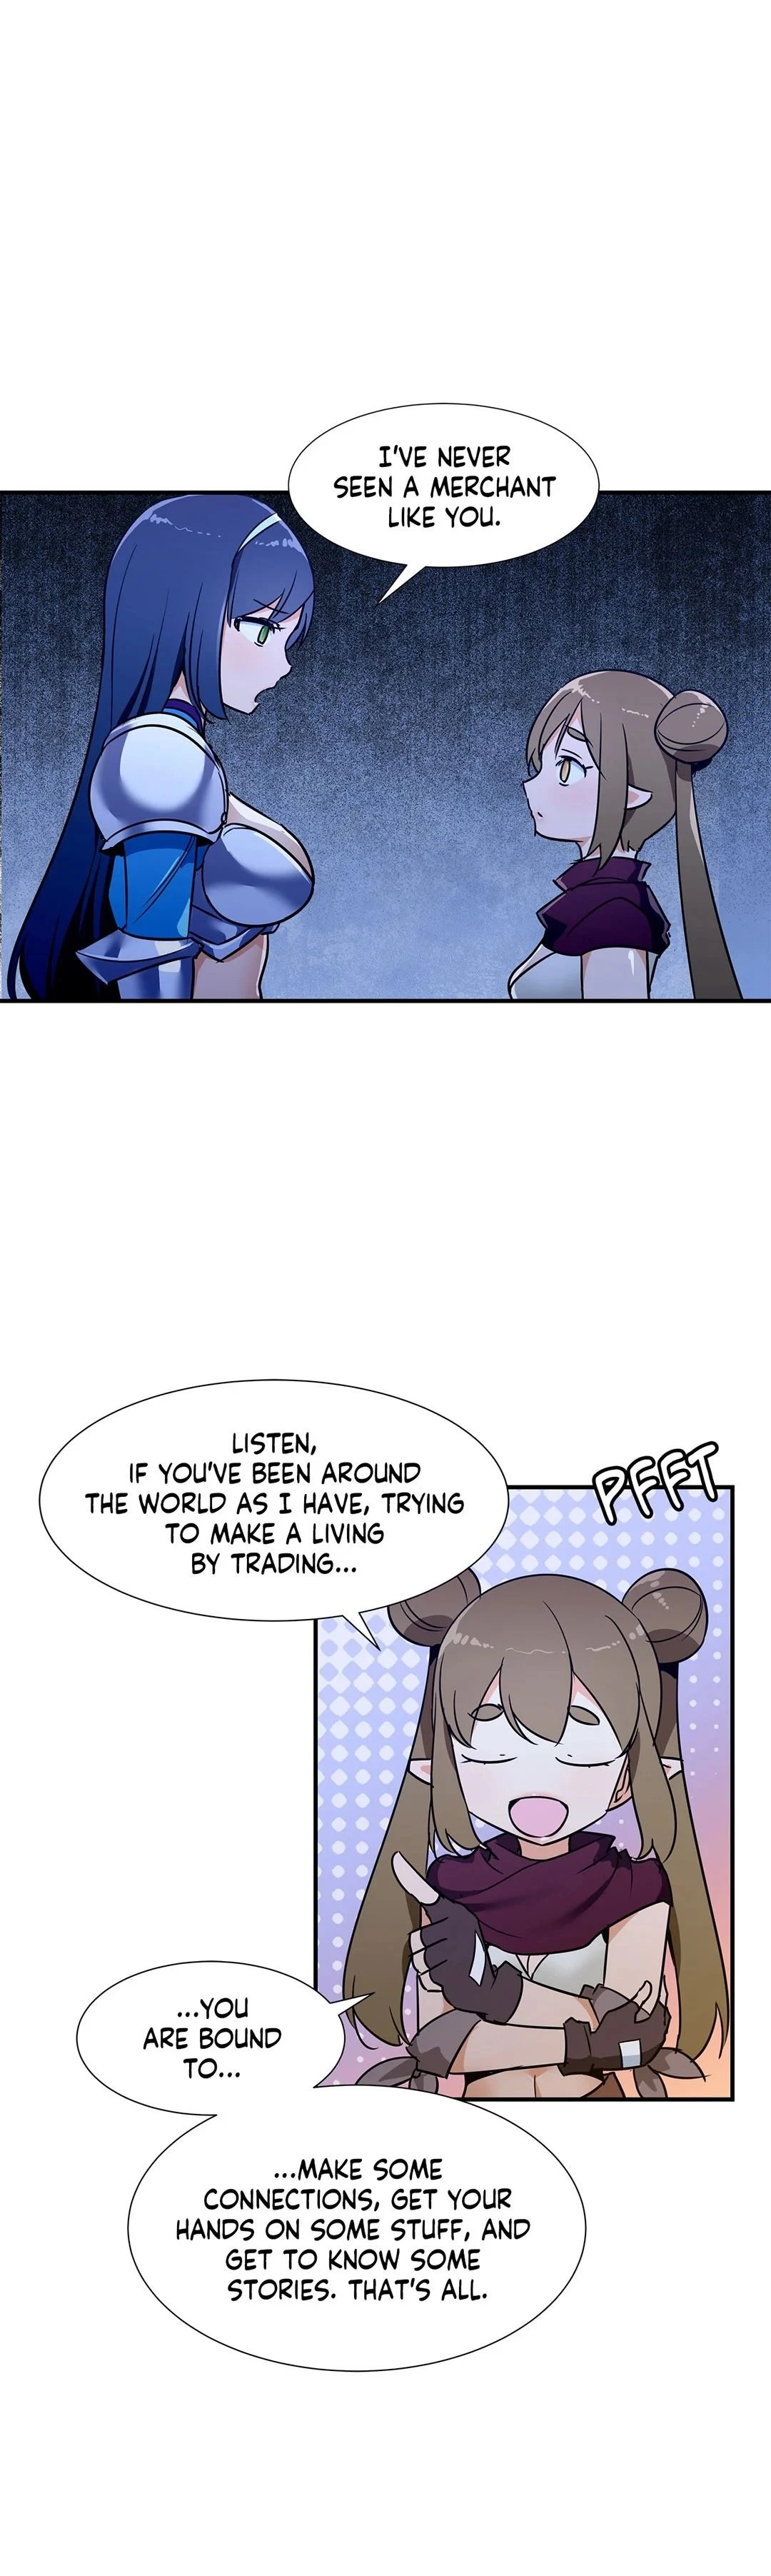 Rise and Shine, Hero! - Chapter 23 Page 7